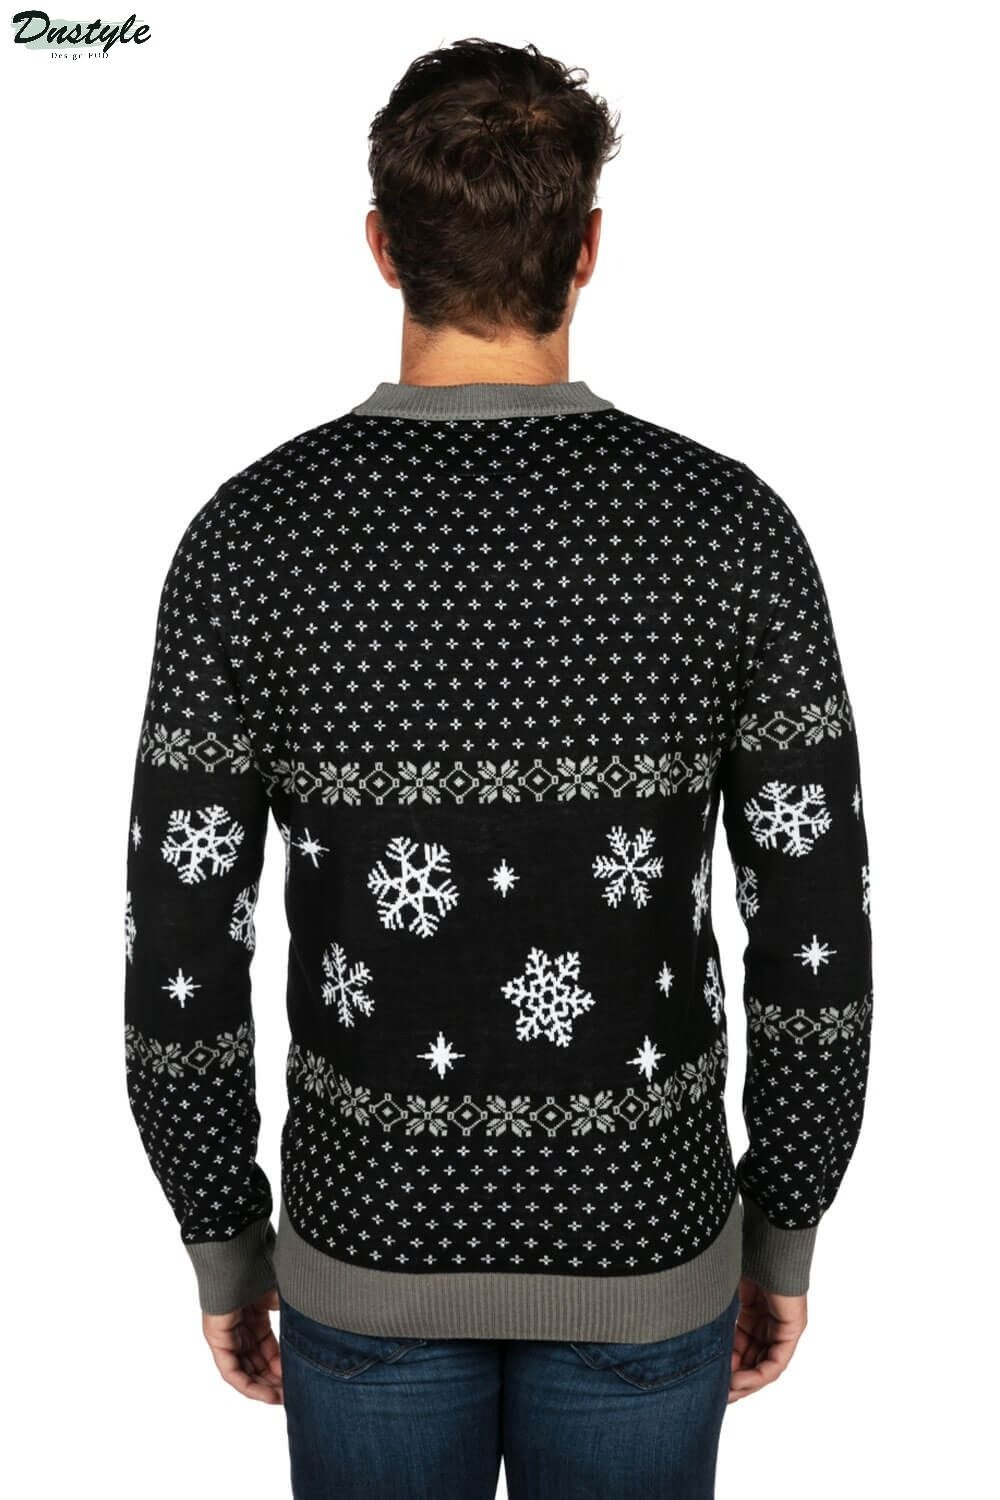 Let it Snow Light Up Ugly Christmas Sweater